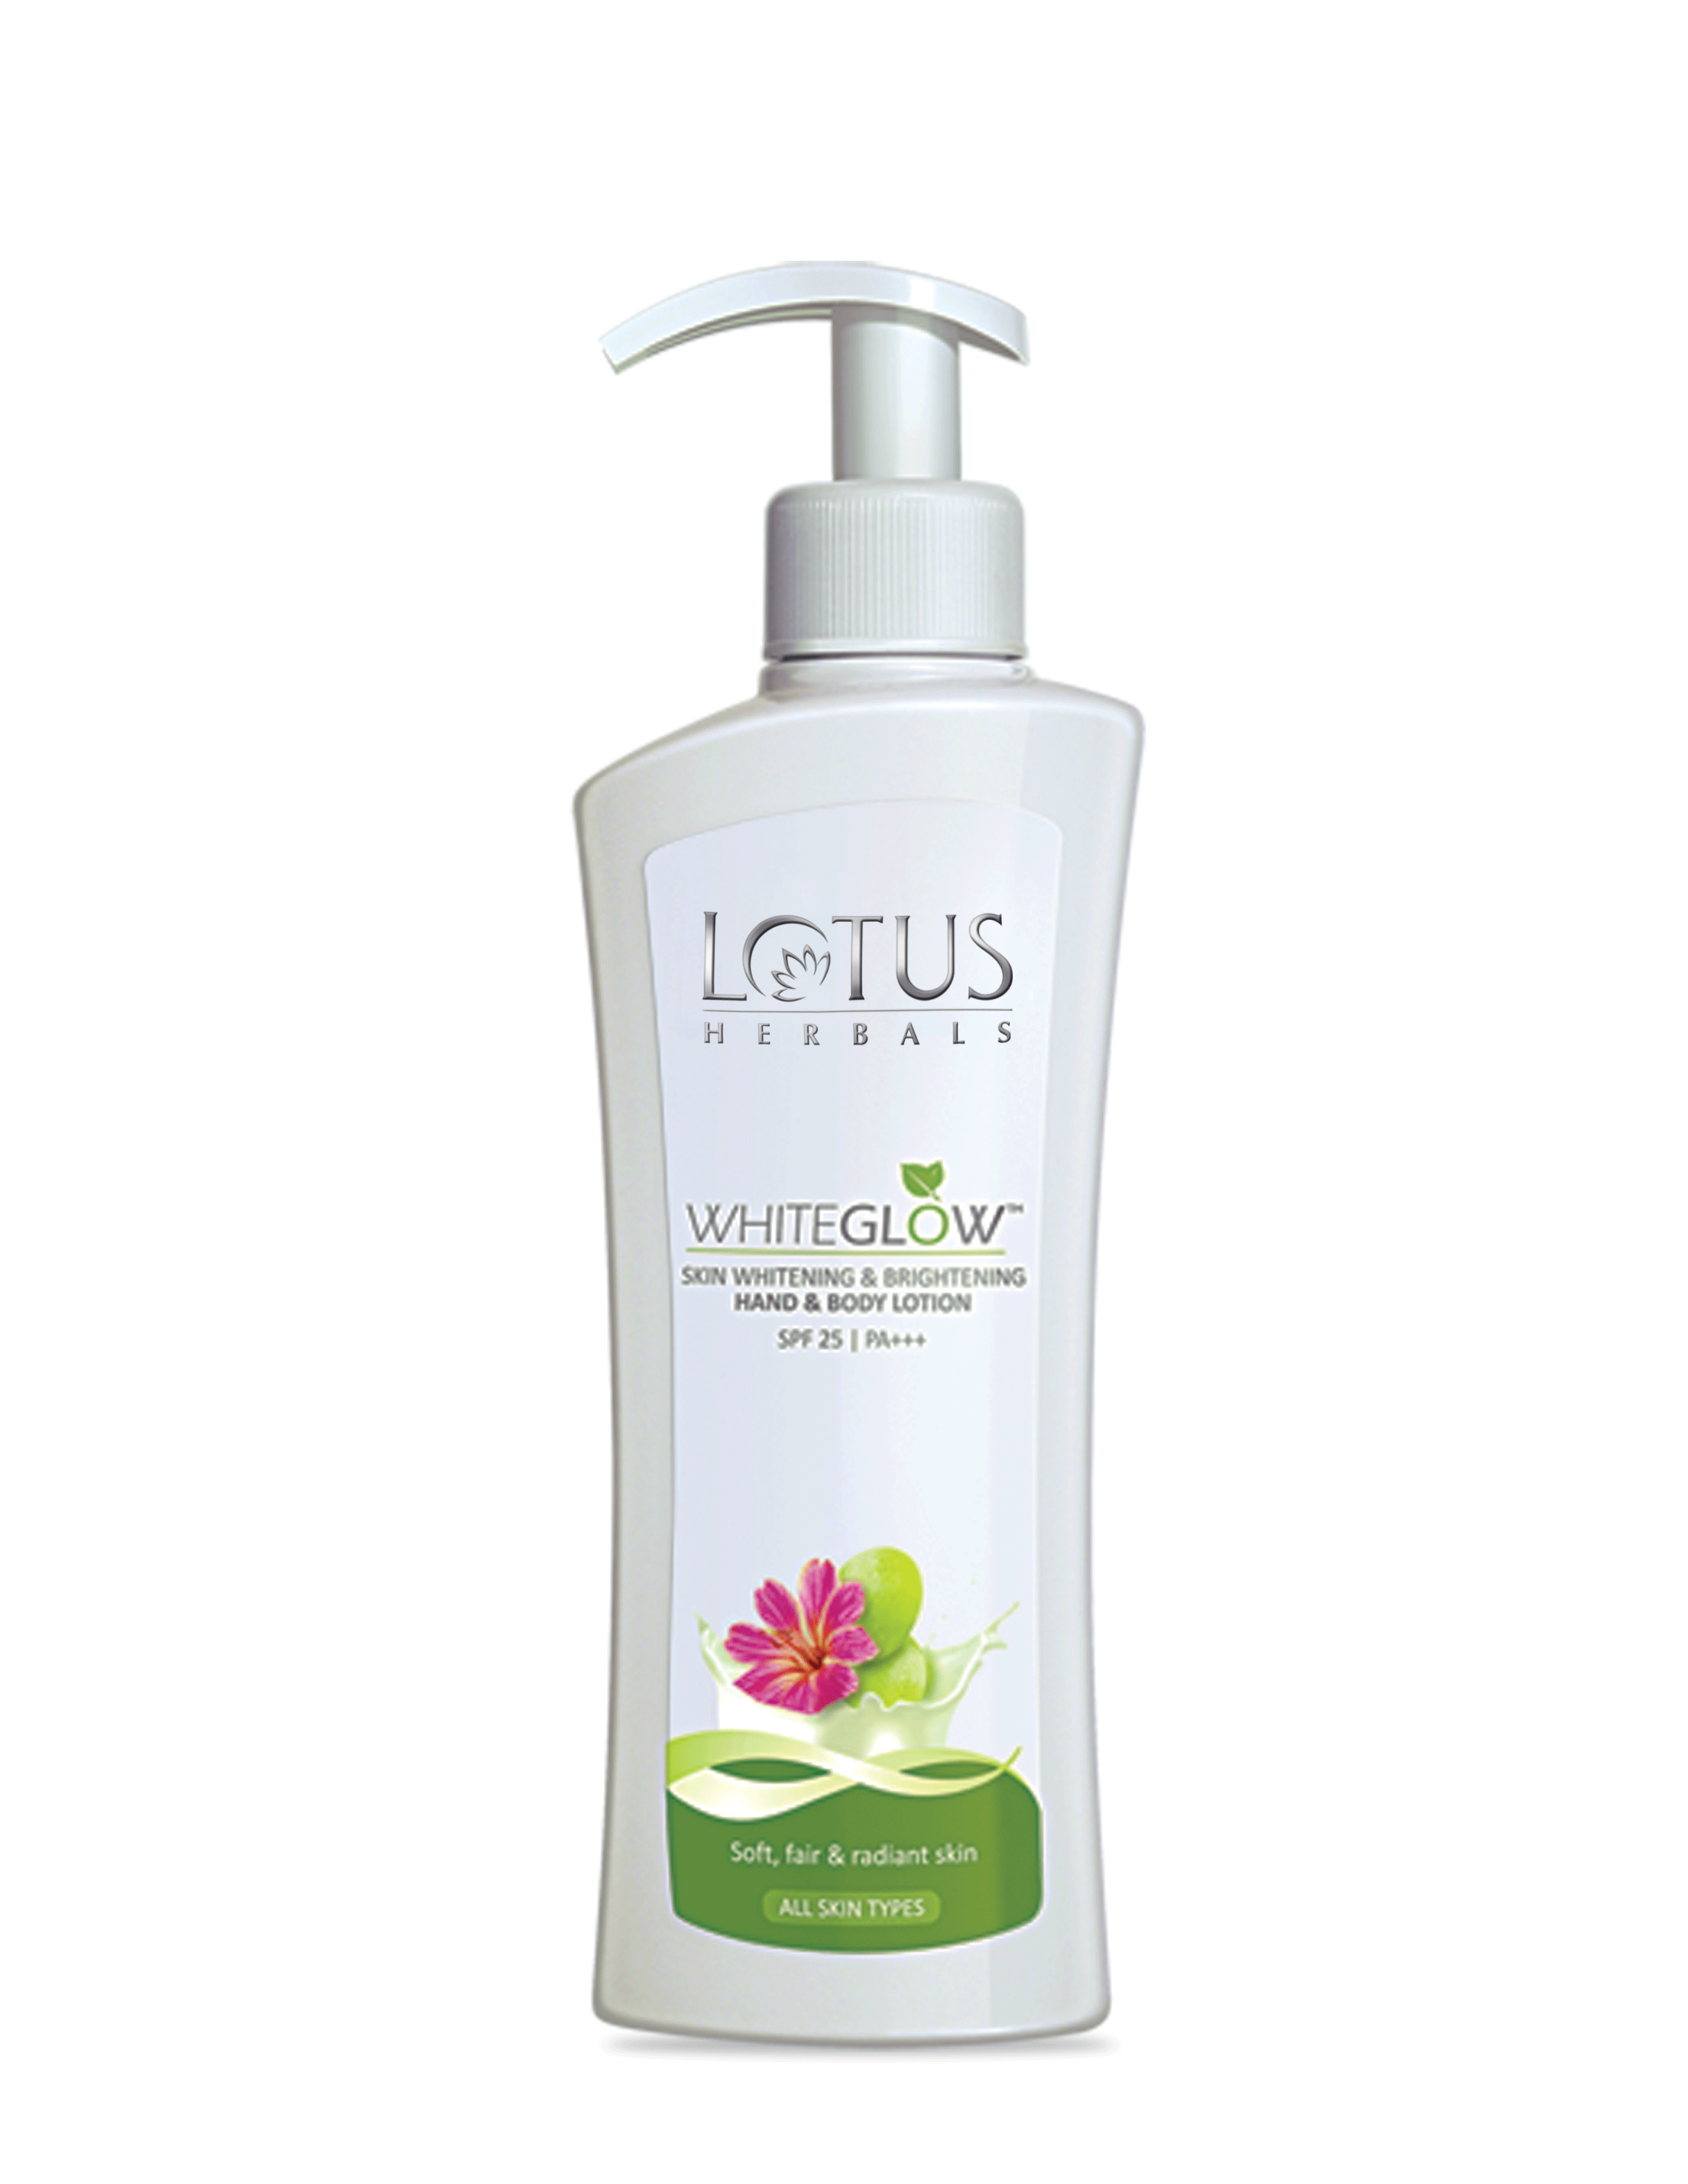 Lotus Herbal White Glow SPF 25 Hand & Body Lotion 300 ml: Buy Lotus Herbal White Glow SPF 25 Hand & Body Lotion 300 ml Best Prices in India Snapdeal